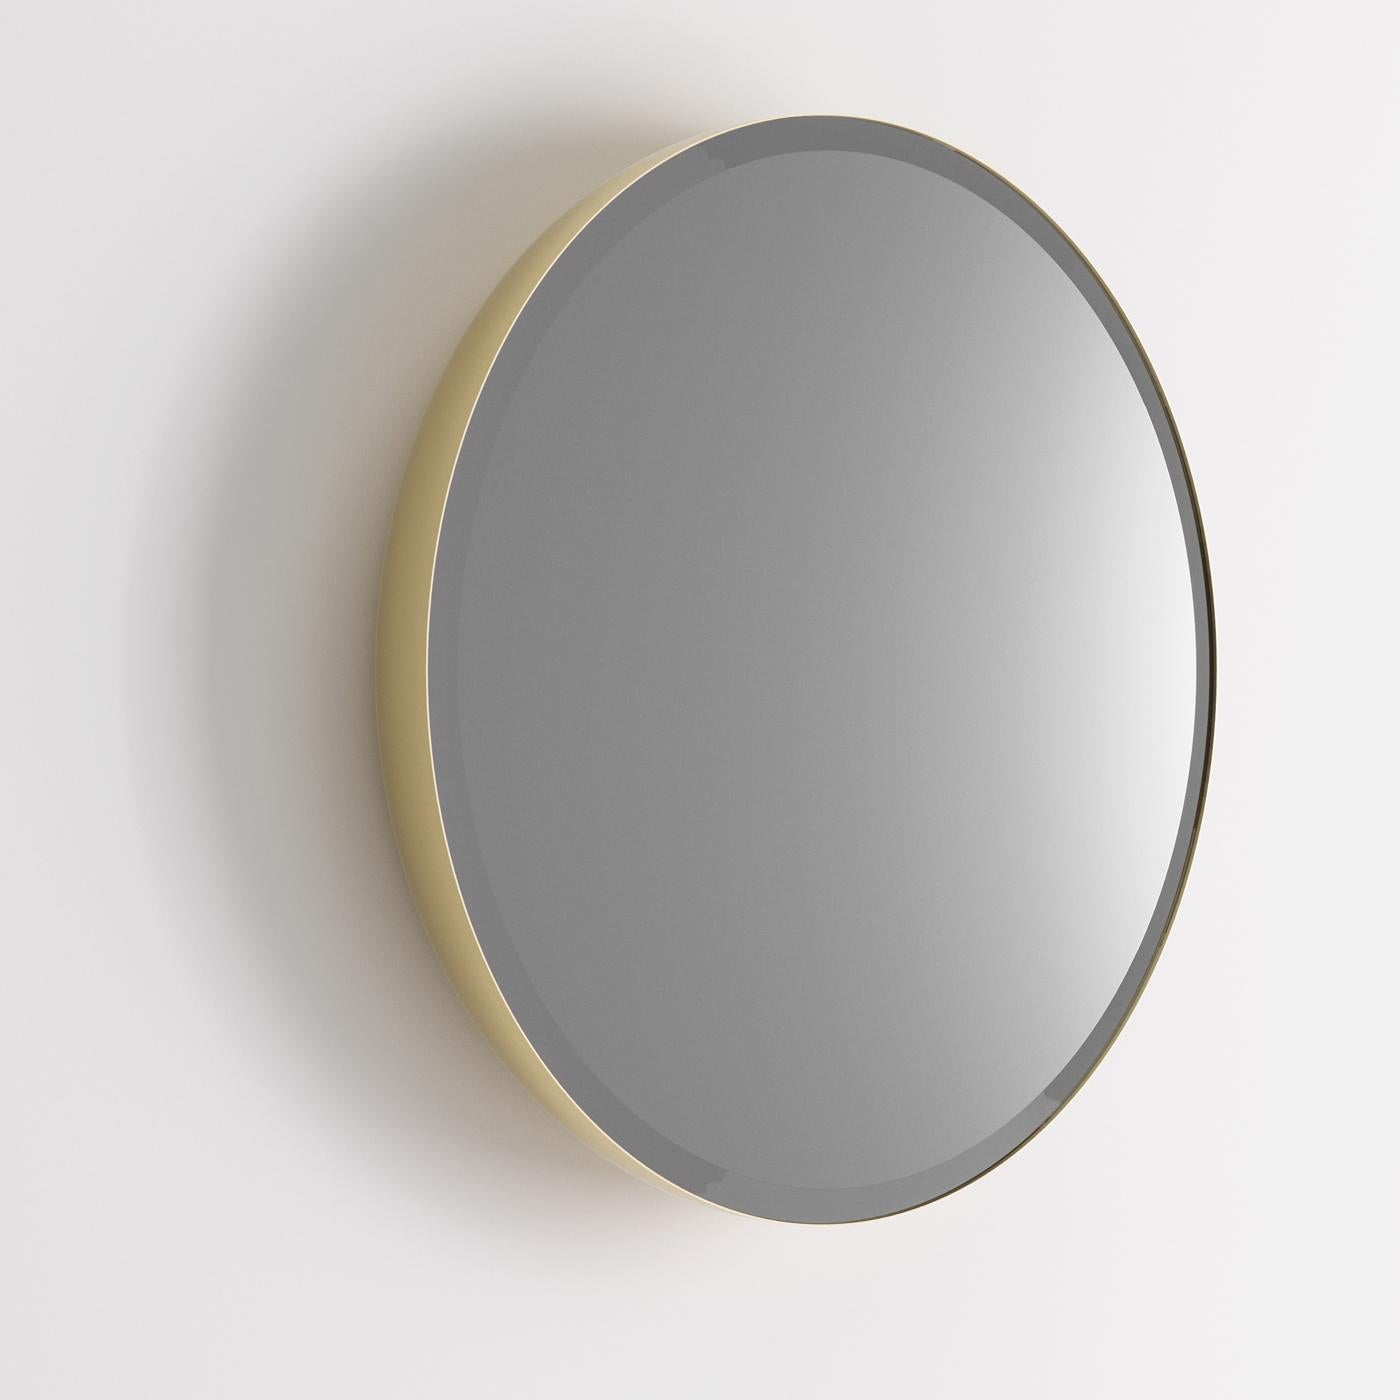 A sophisticated piece that boasts simple, elegant lines and natural finishes, this oval mirror elegantly suits a working environment as well as a home interior. A brass-varnished steel frame (5 cm-thick) supports it and adds a robust, durable